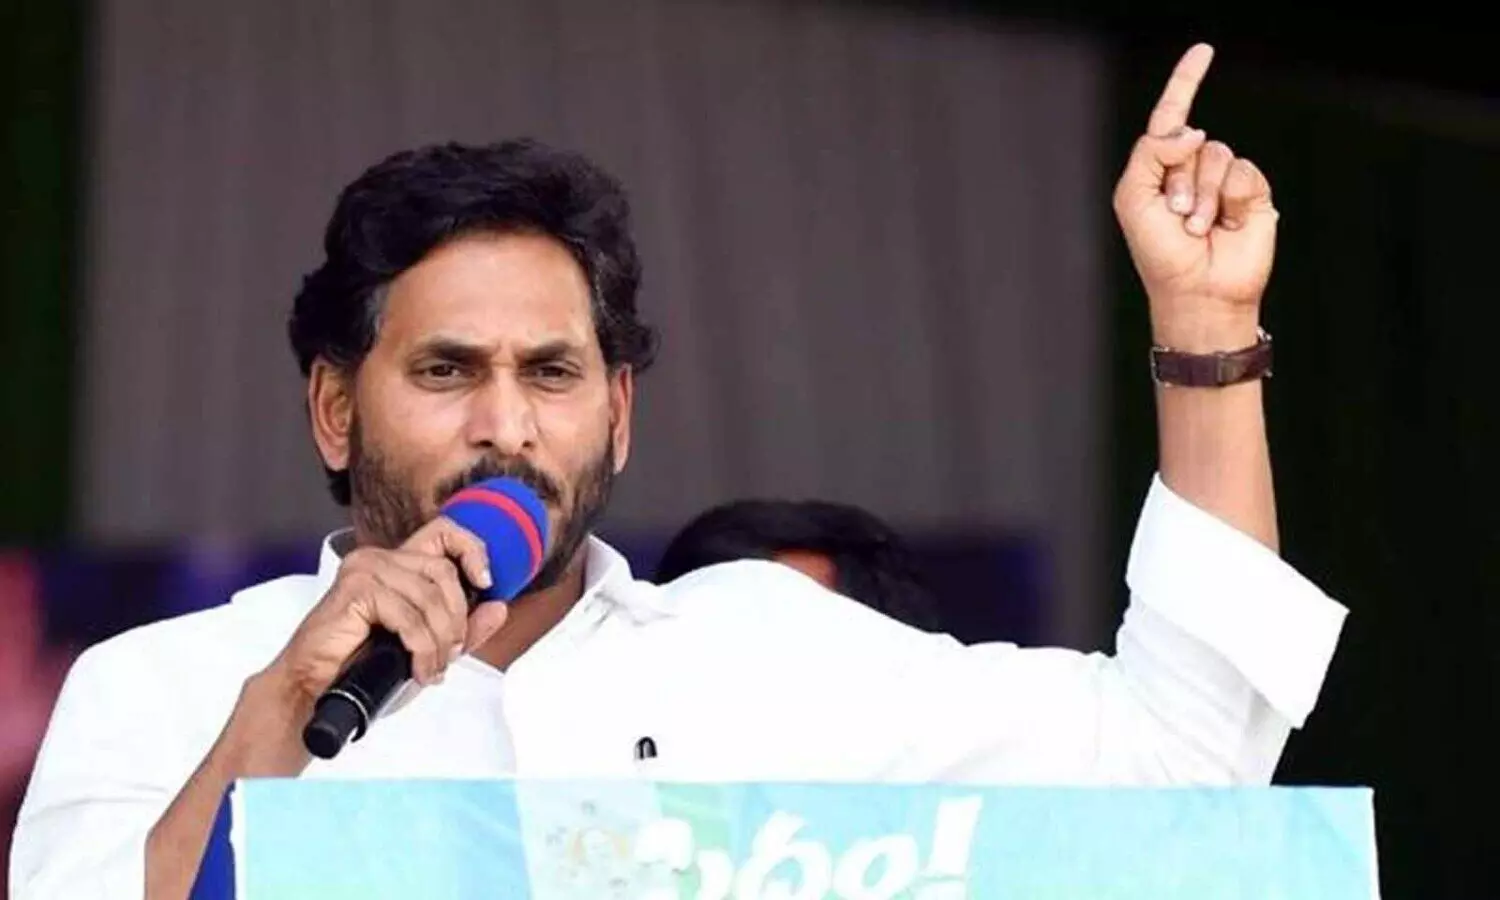 Social engineering in candidate selection, booth-level teams mark YSR Congress party’s poll strategy